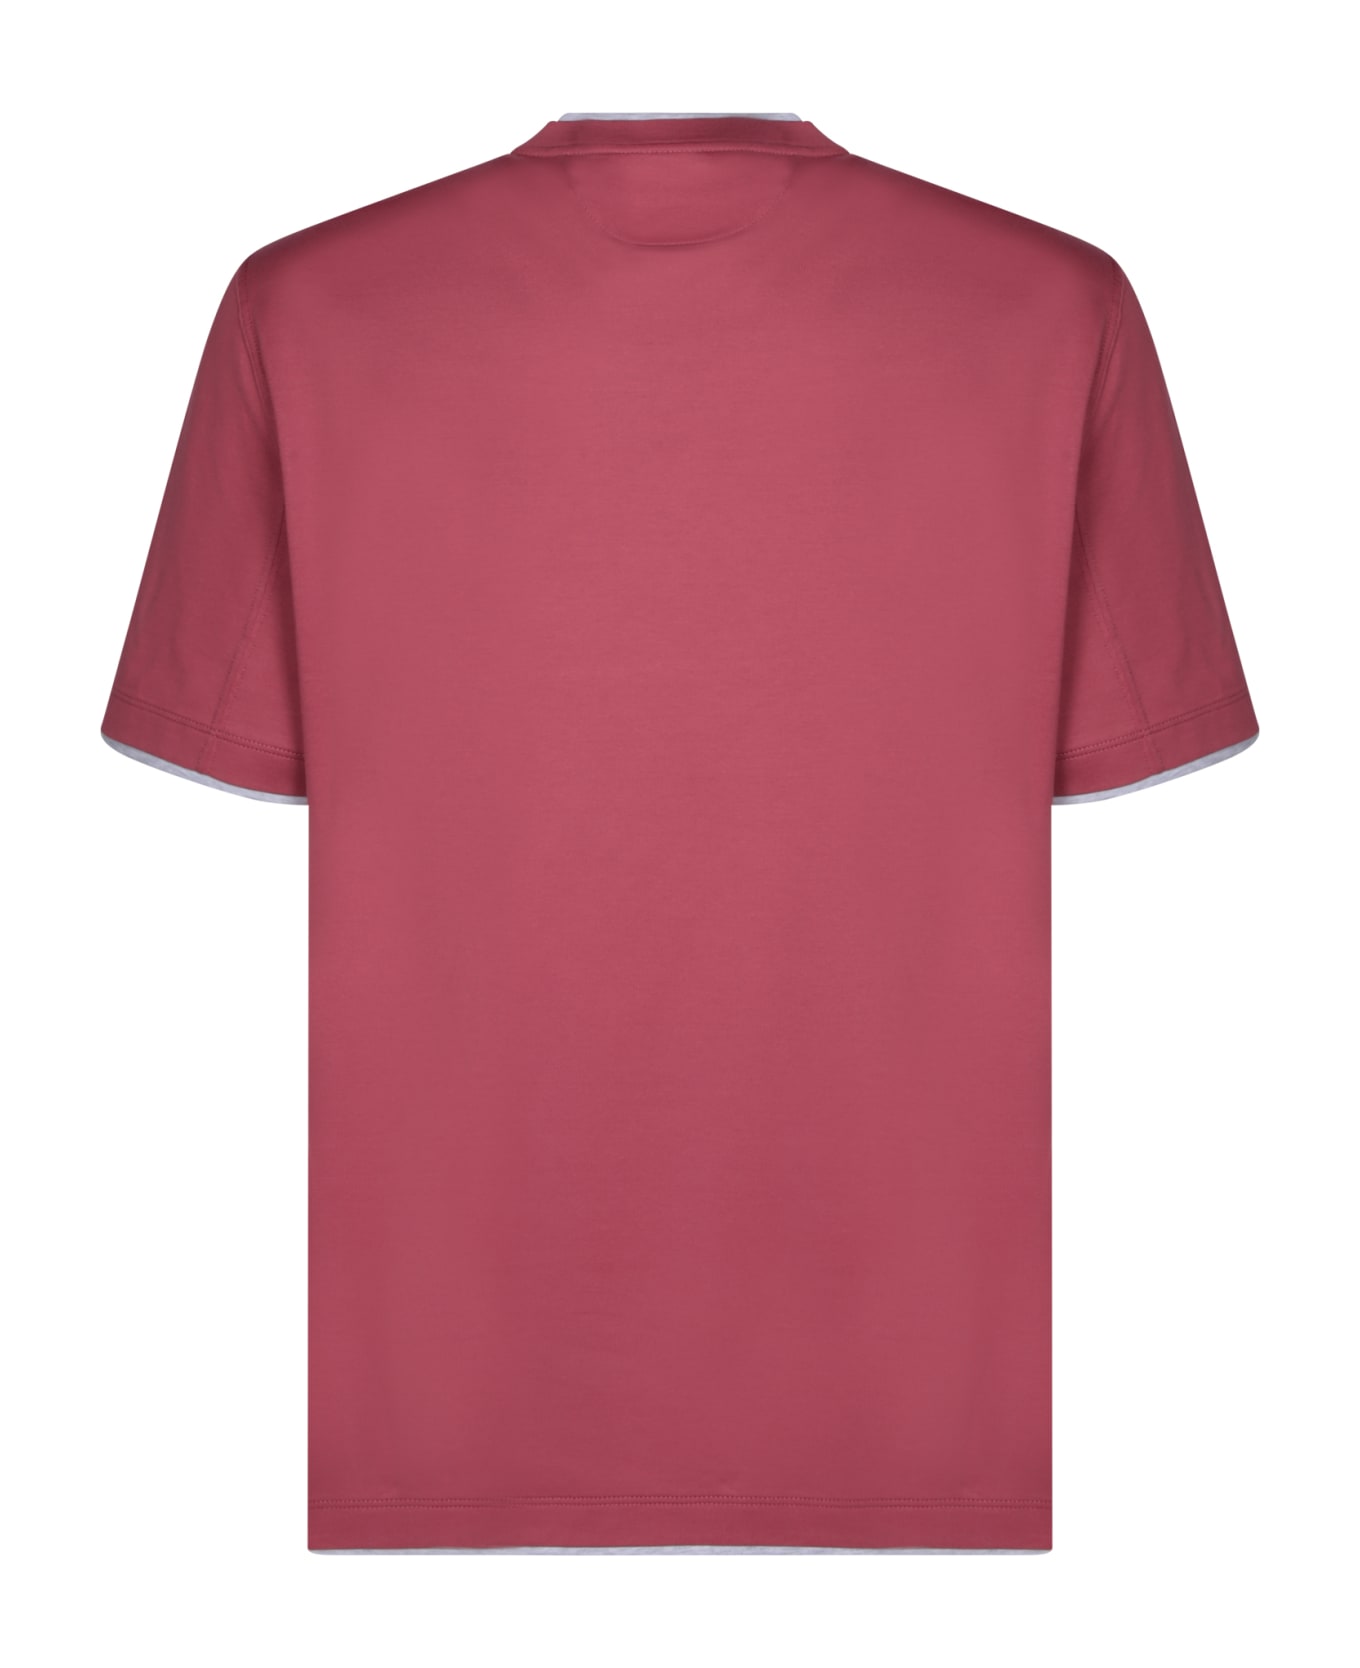 Brunello Cucinelli Contrasting Edges T-shirt - Red シャツ